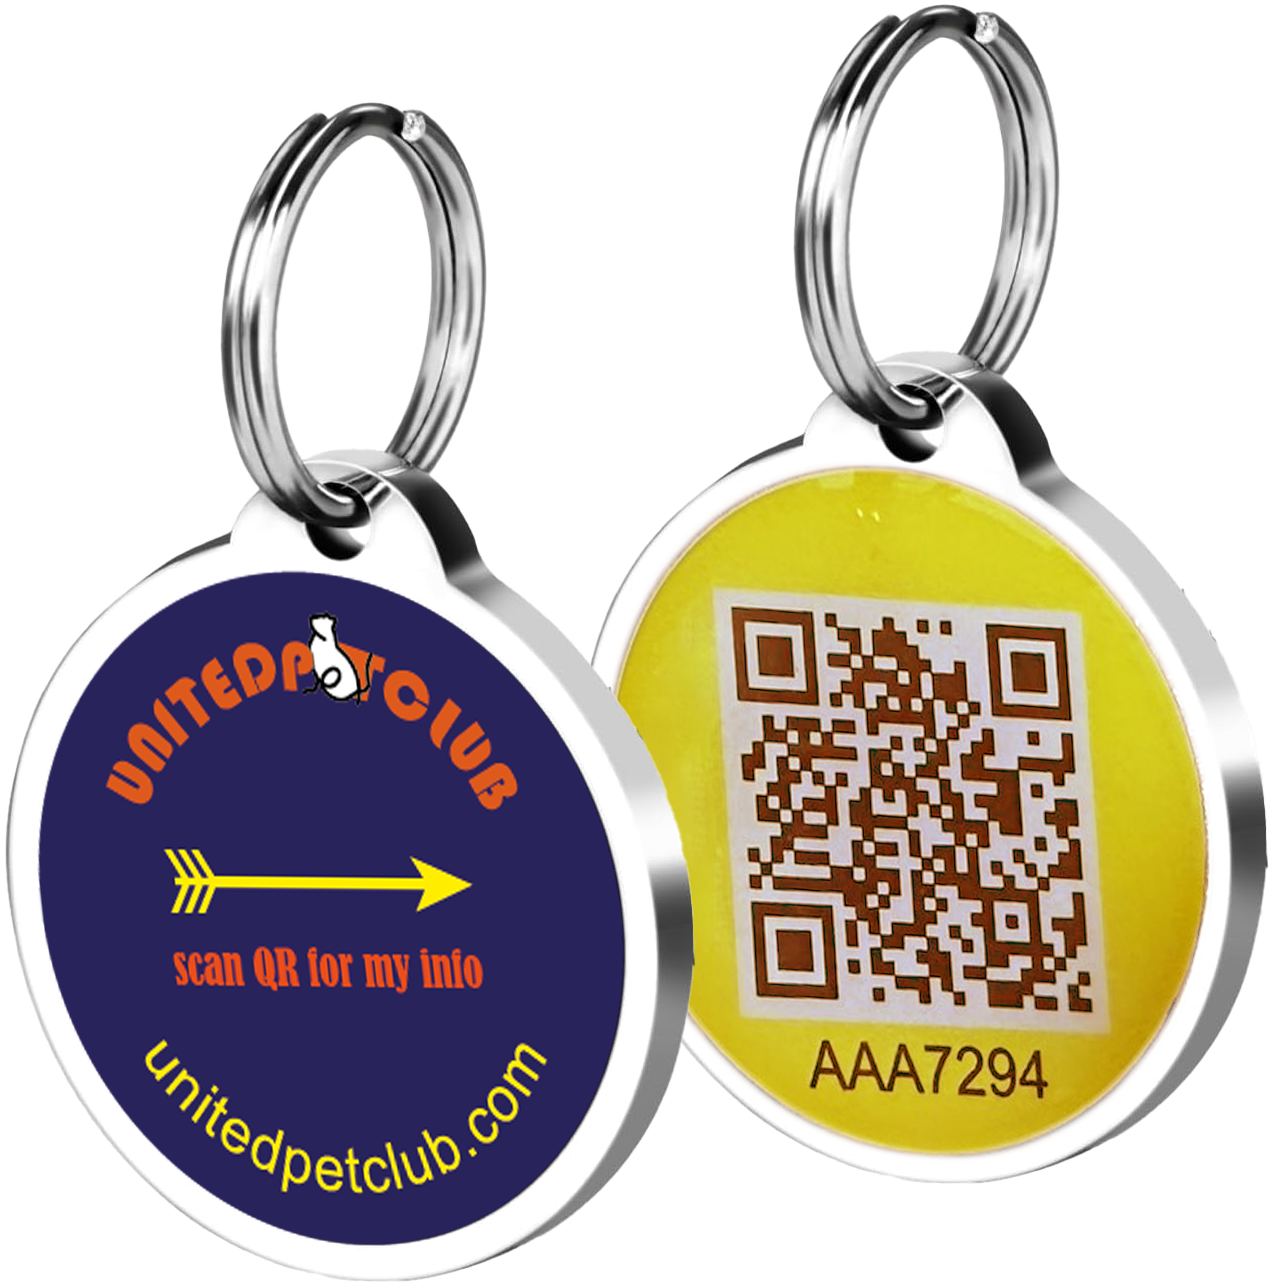 Qr pet recovery tag for cats and dogs